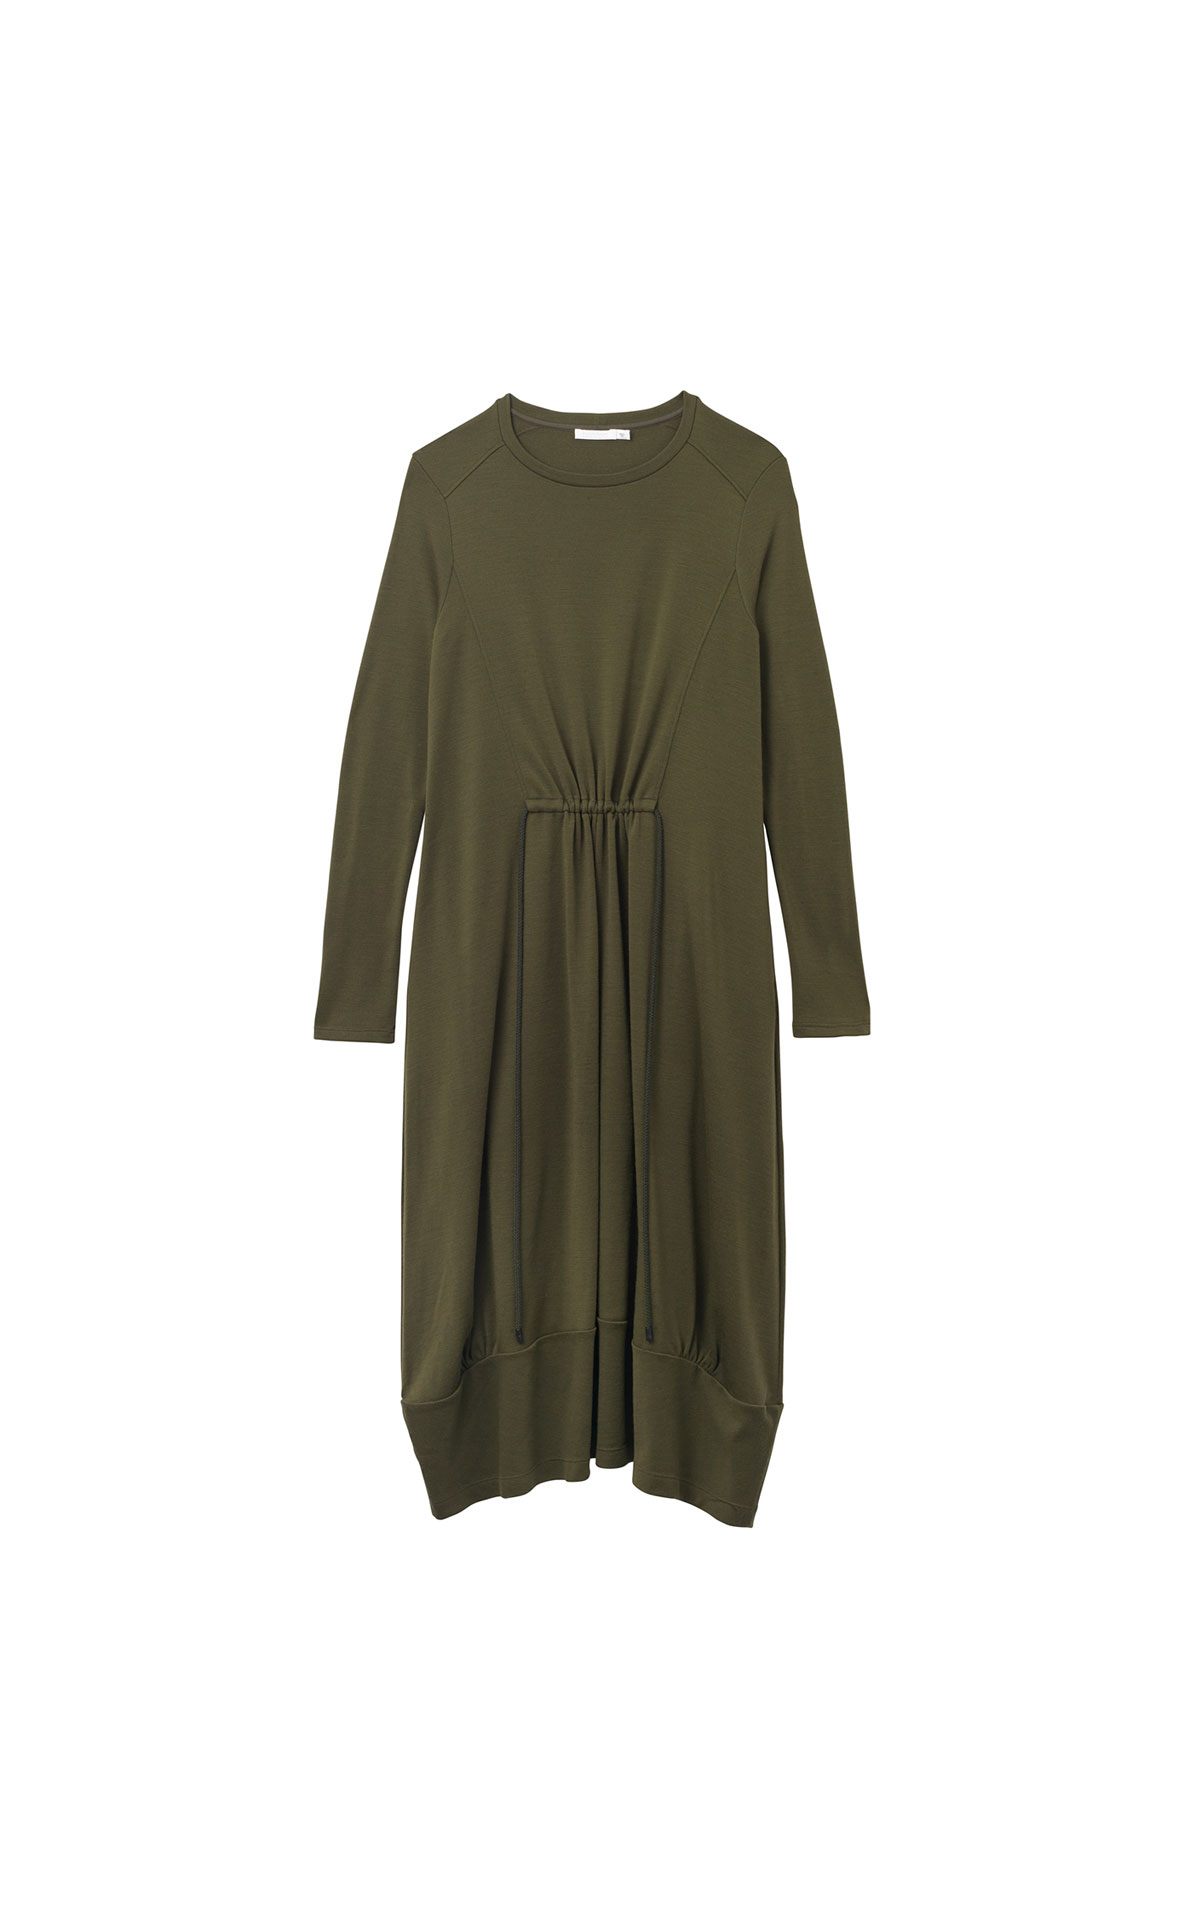 Bamford Marcia dress from Bicester Village